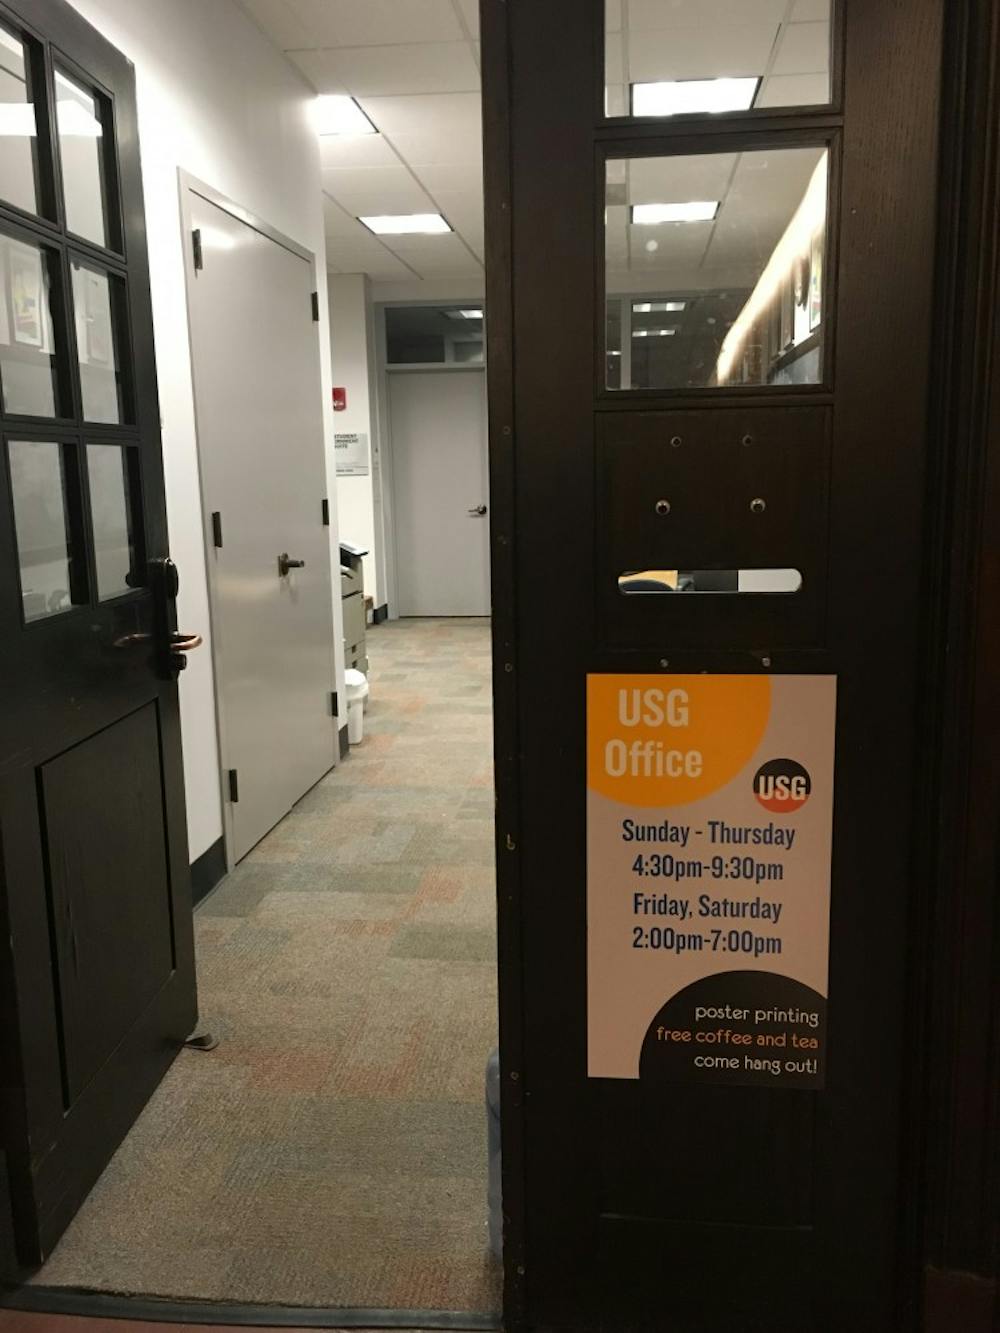 <p>Photo Caption: The office of the Undergraduate Student Government in Frist Campus Center.</p>
<h6>Photo Credit: Isabel Ting / The Daily Princetonian</h6>